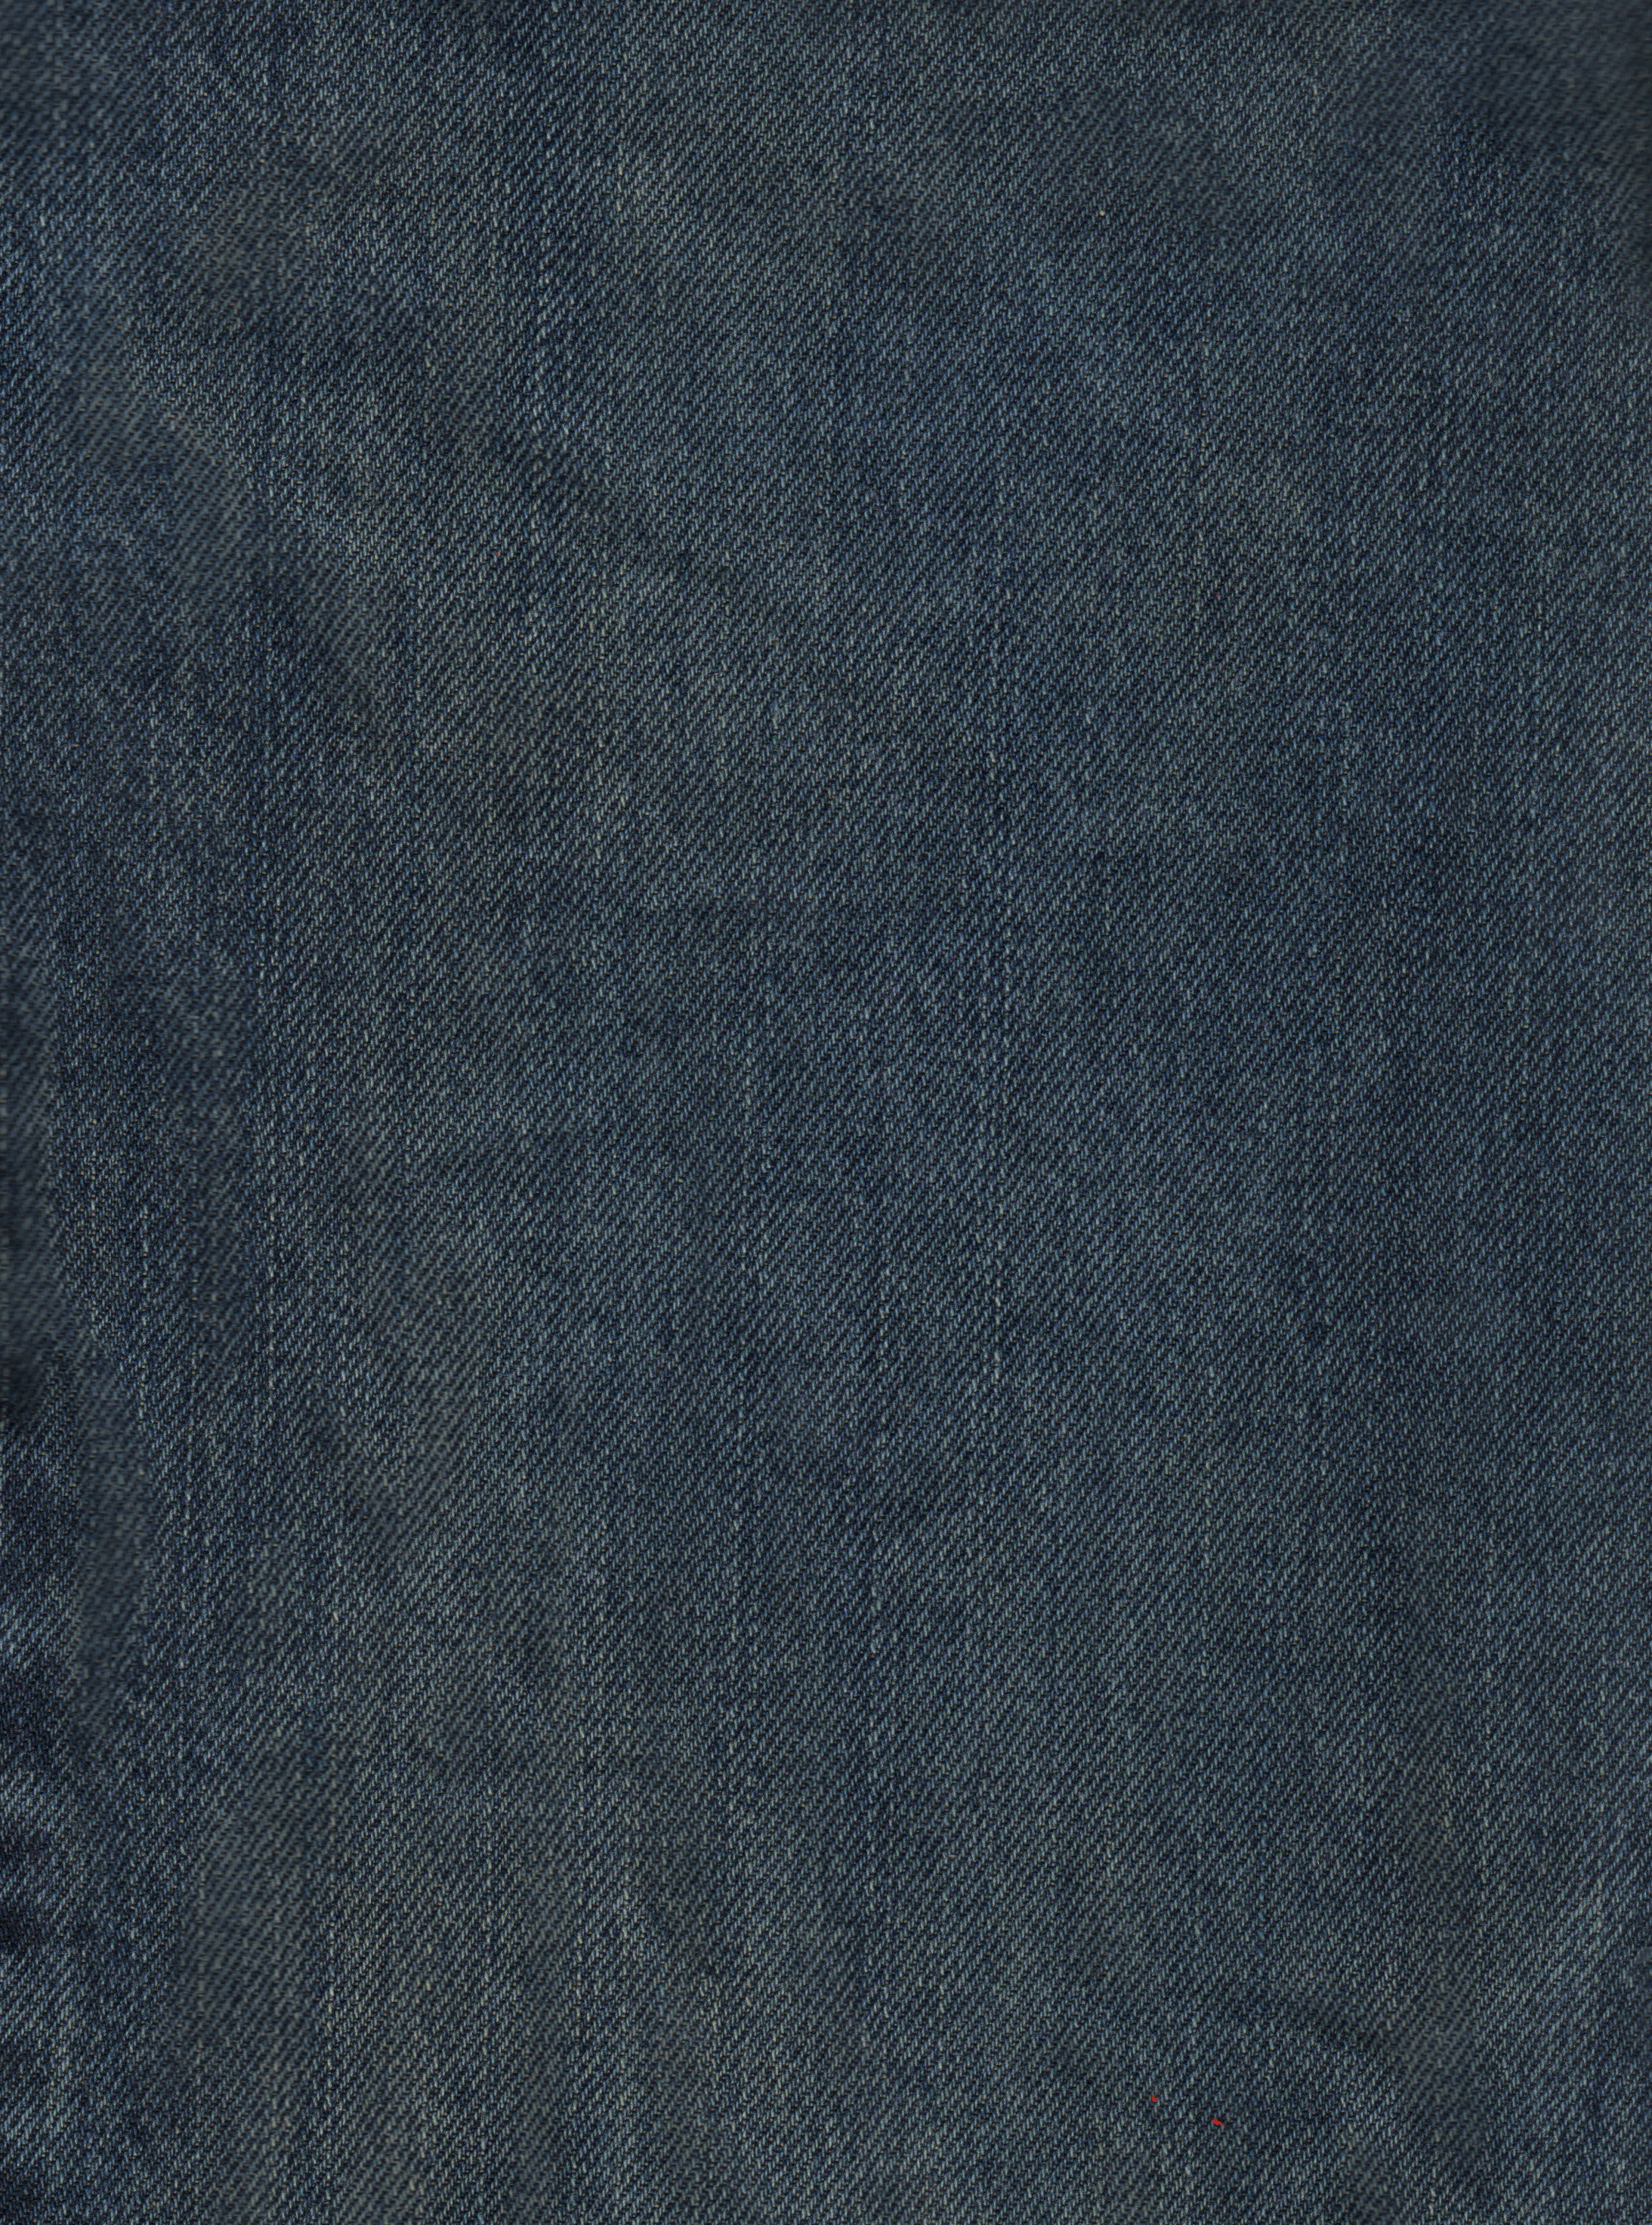 Free Simple Tactile Fabric Texture  Texture  L T